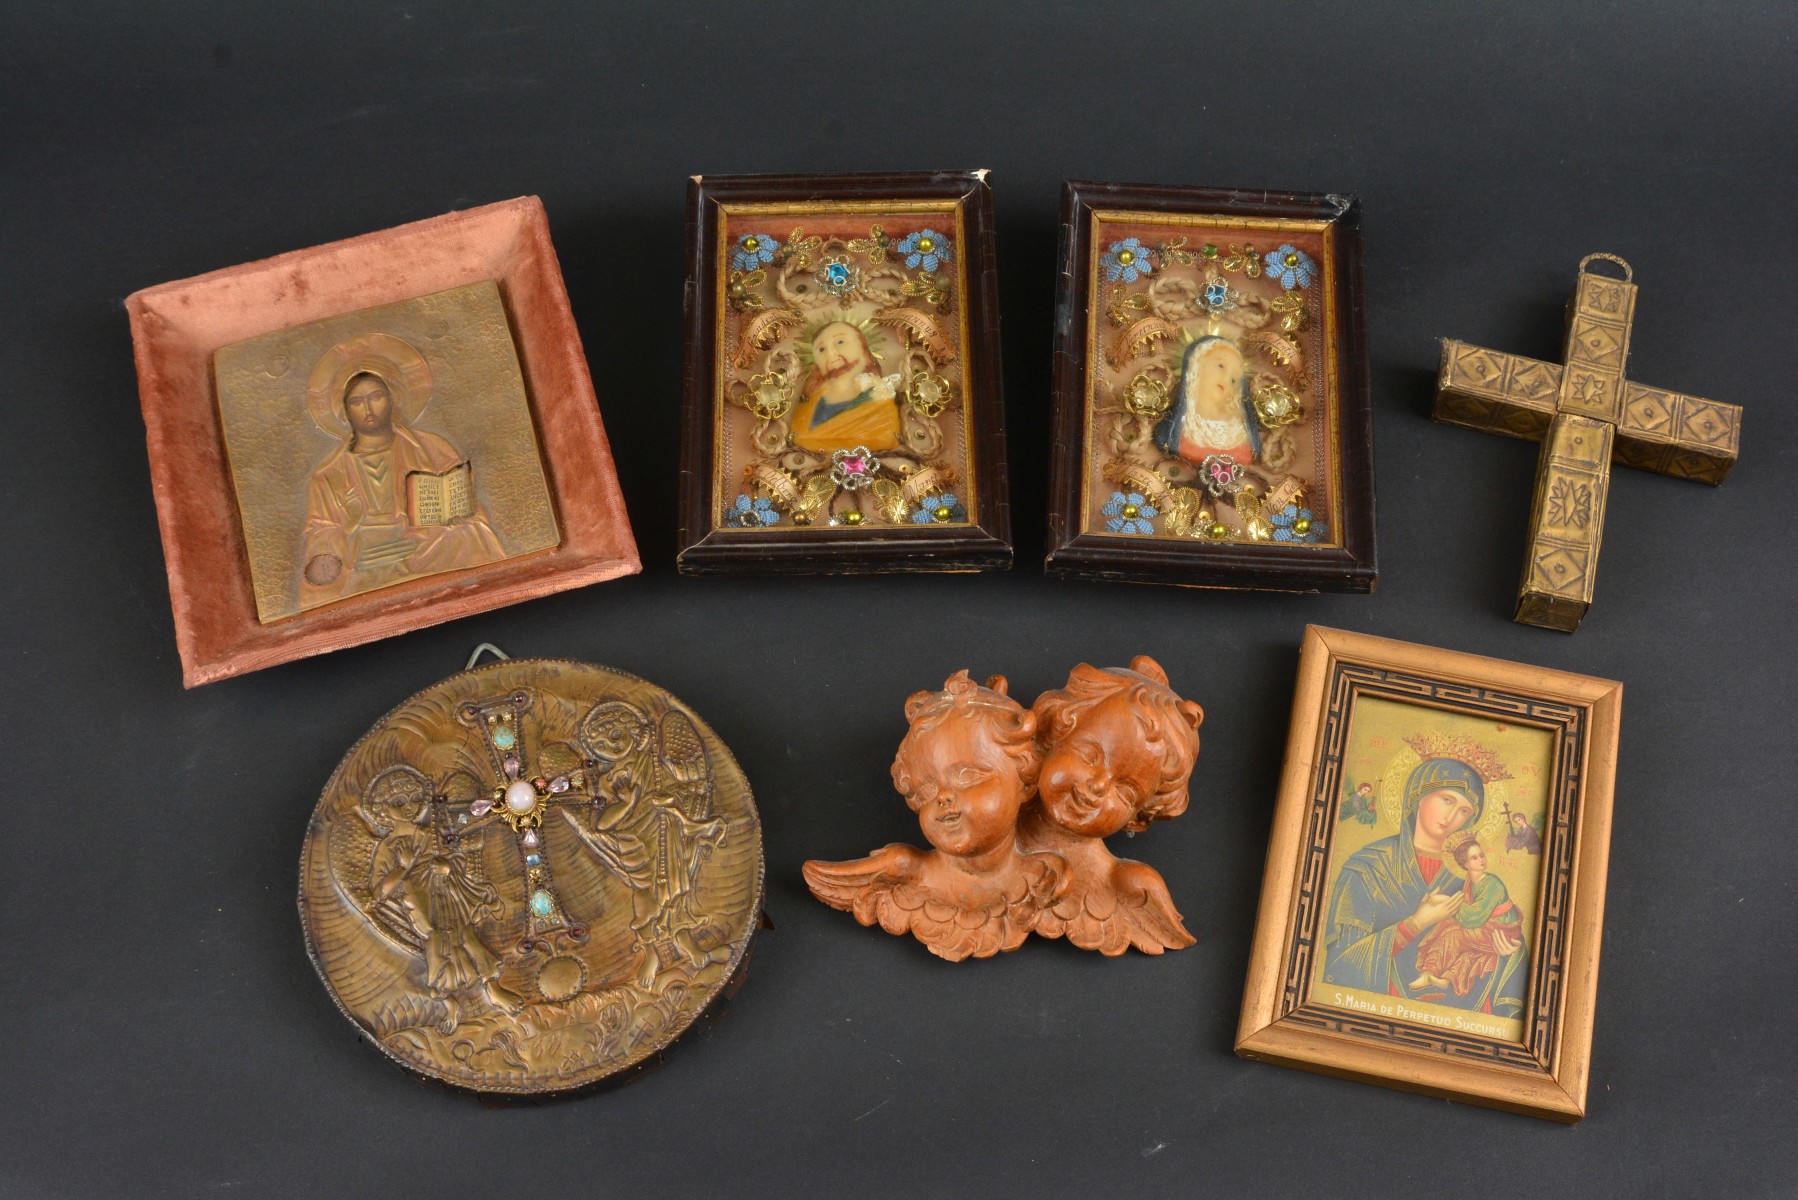 A COLLECTION OF SMALL ECCLESIASTICAL OBJECTS